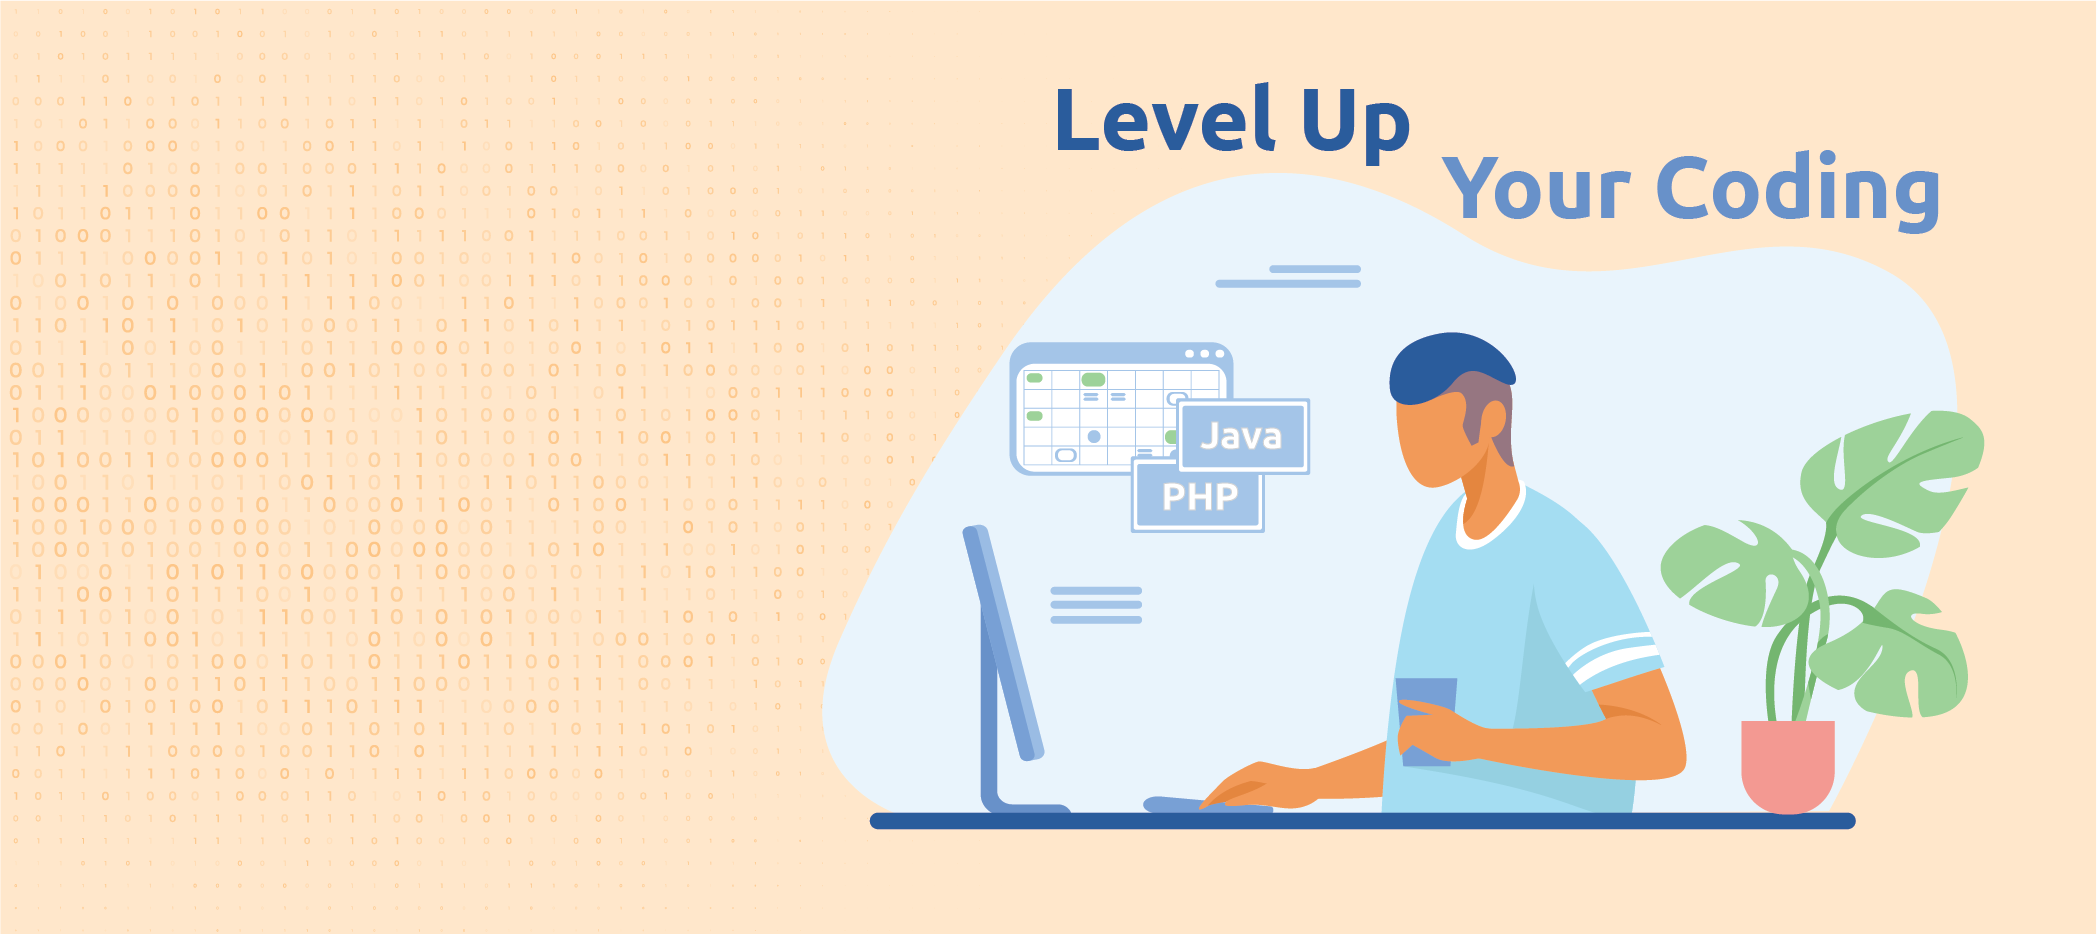 6 Ways to Take Your Coding to the Next Level